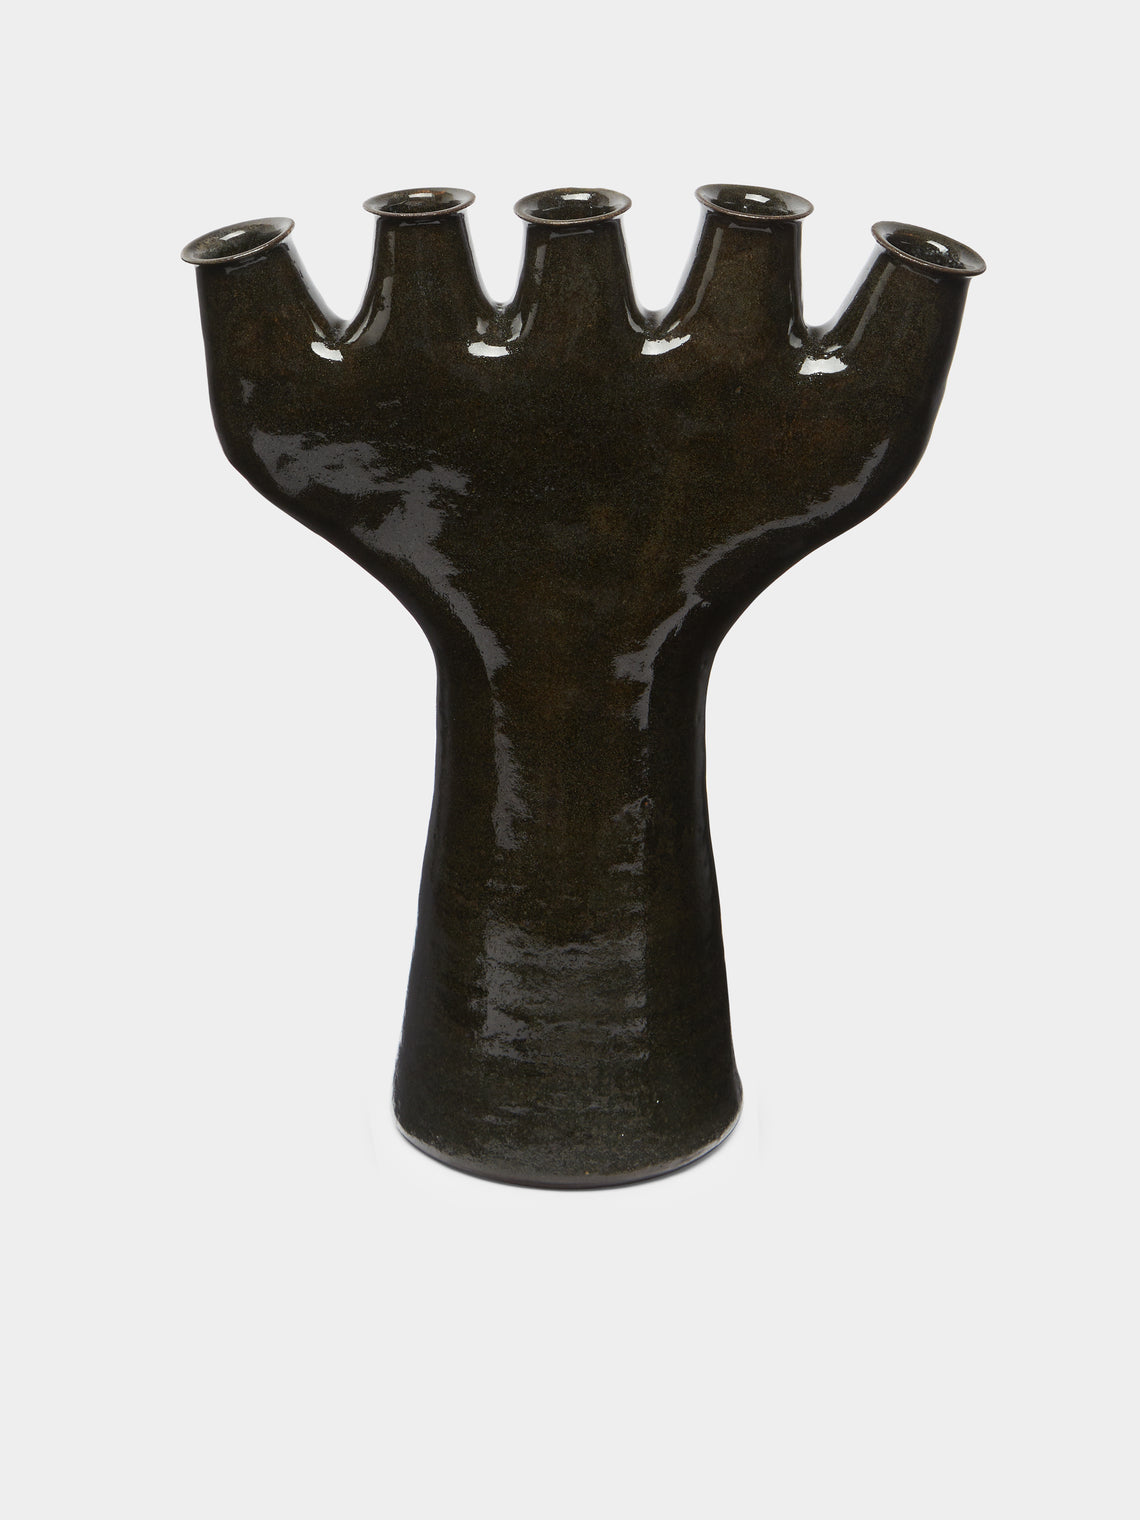 Ali Hewson - Five-Spouted Hand Ceramic Tall Vase -  - ABASK - 